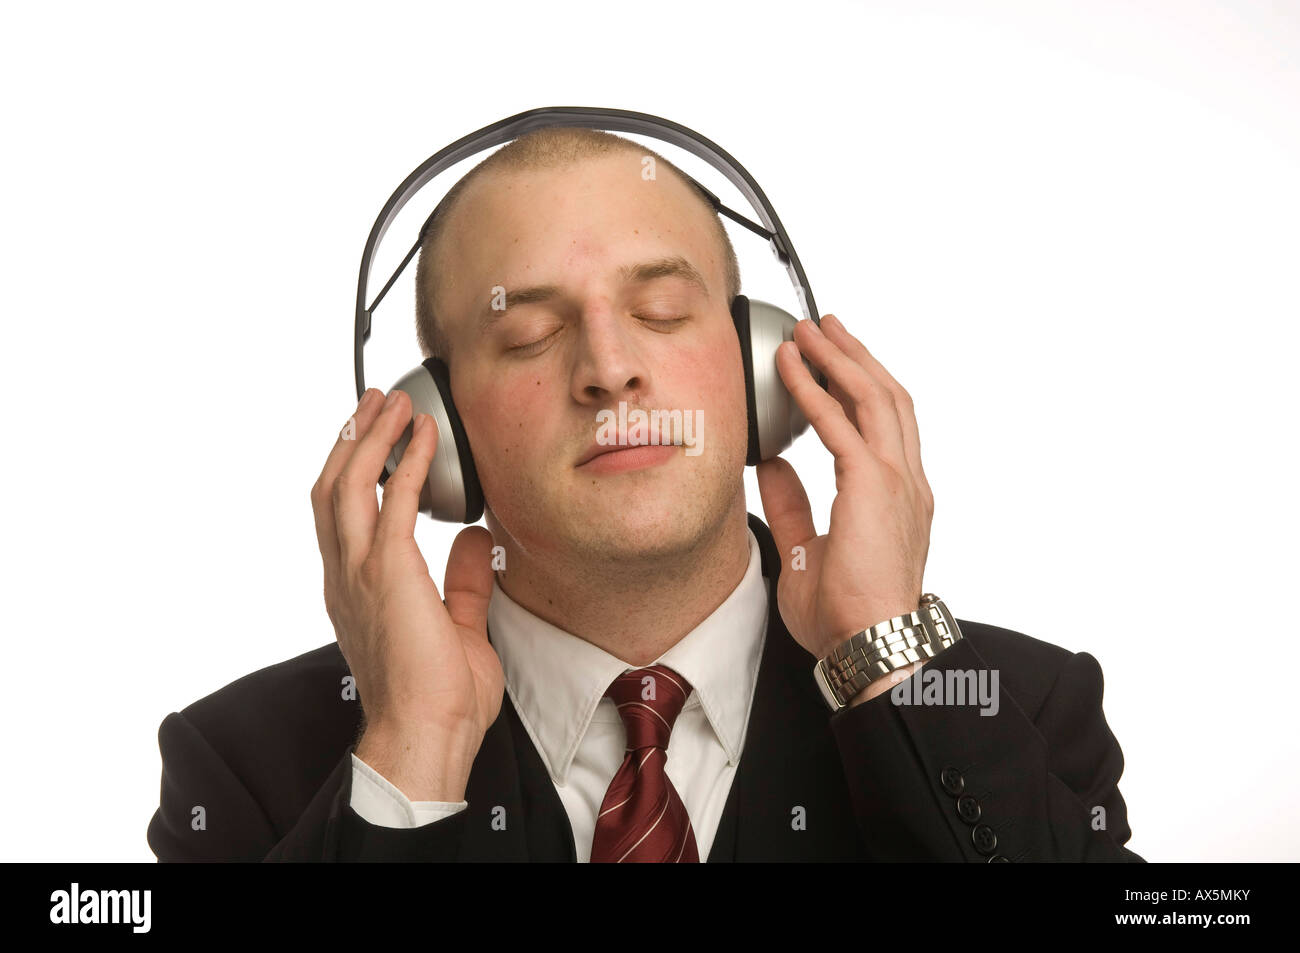 Young man with headphones Stock Photo